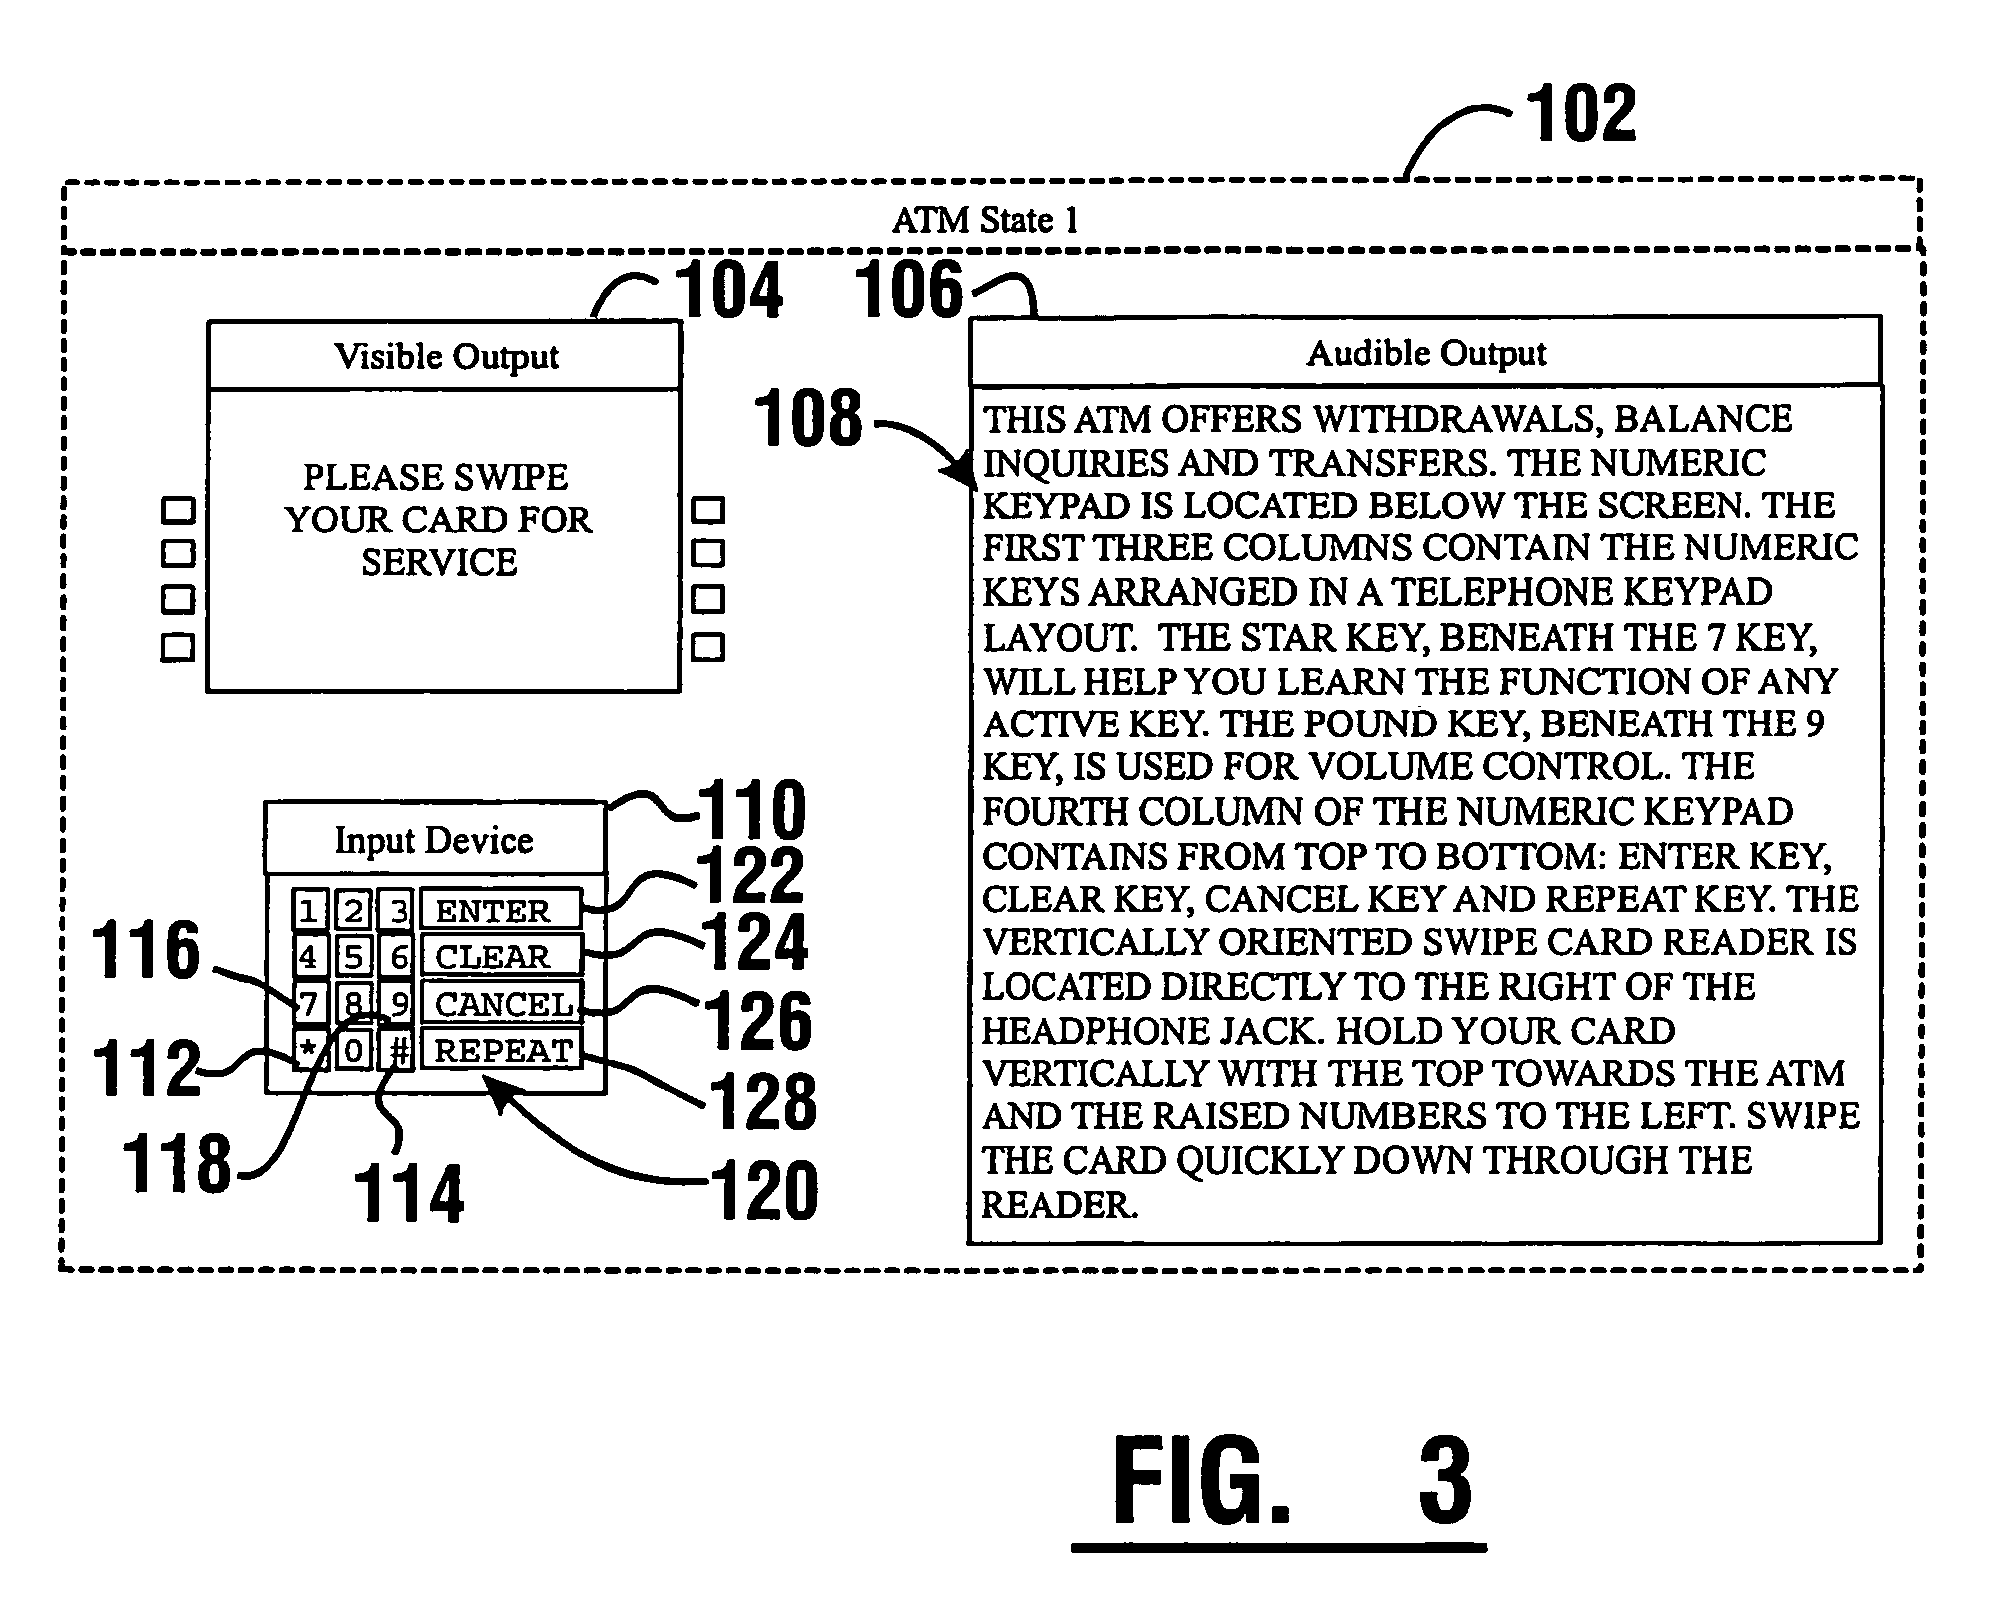 Automated banking machine audible user interface system and method